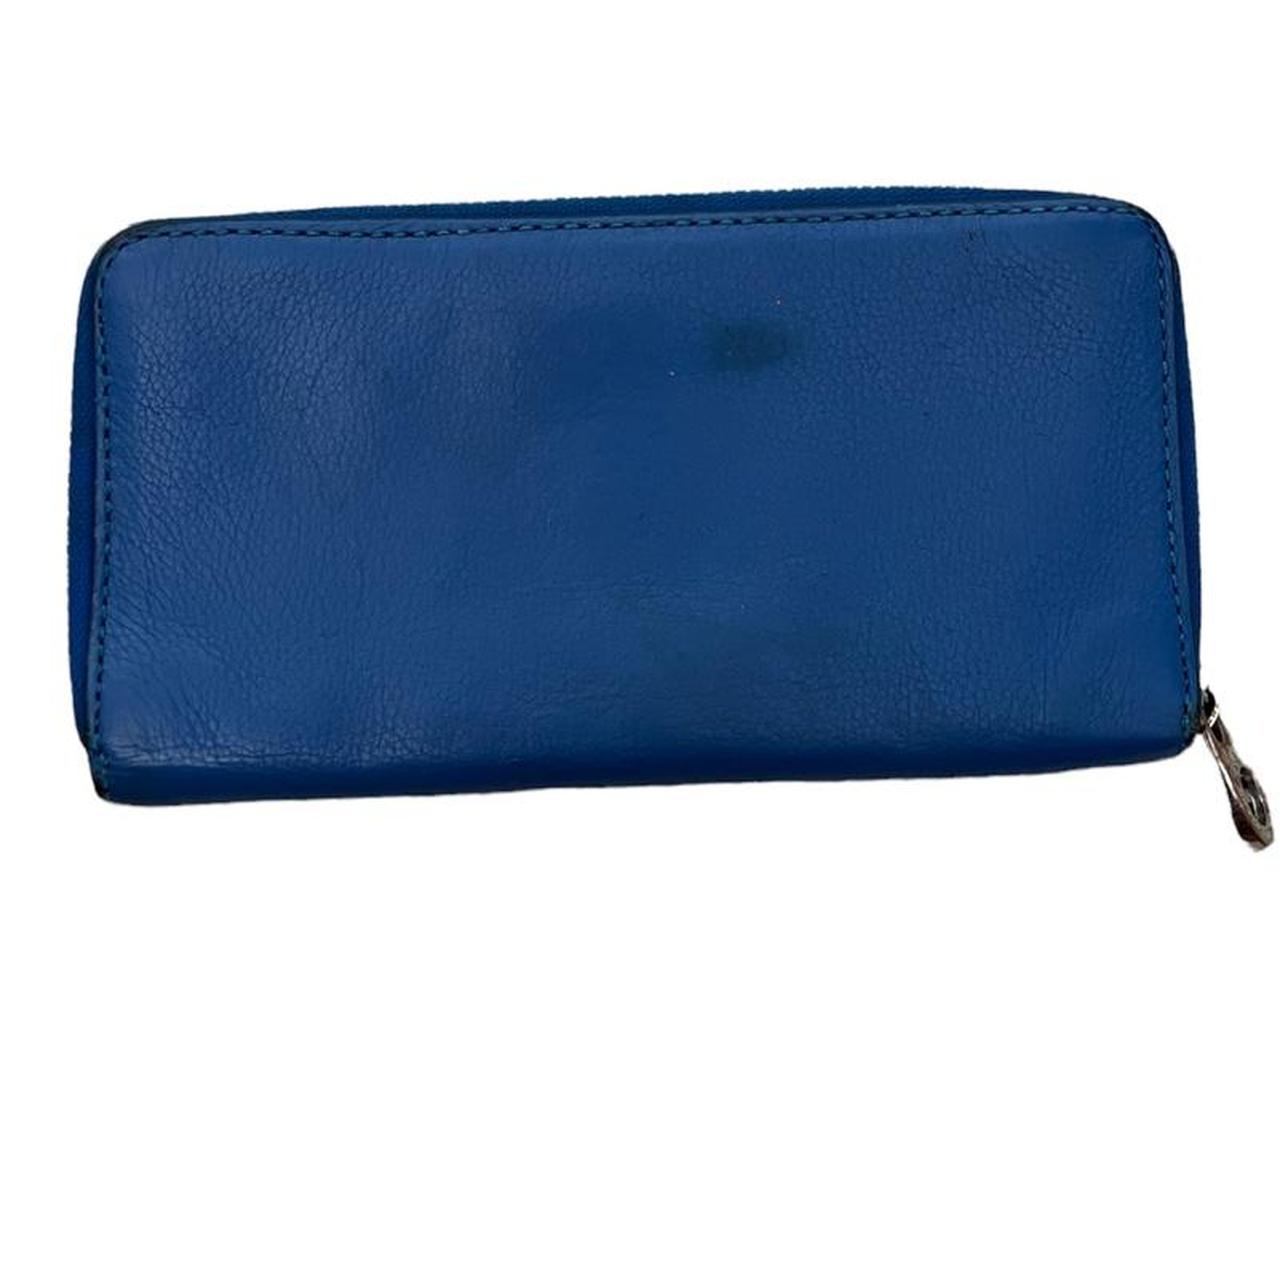 Product Image 2 - Marc by Marc jacobs blue